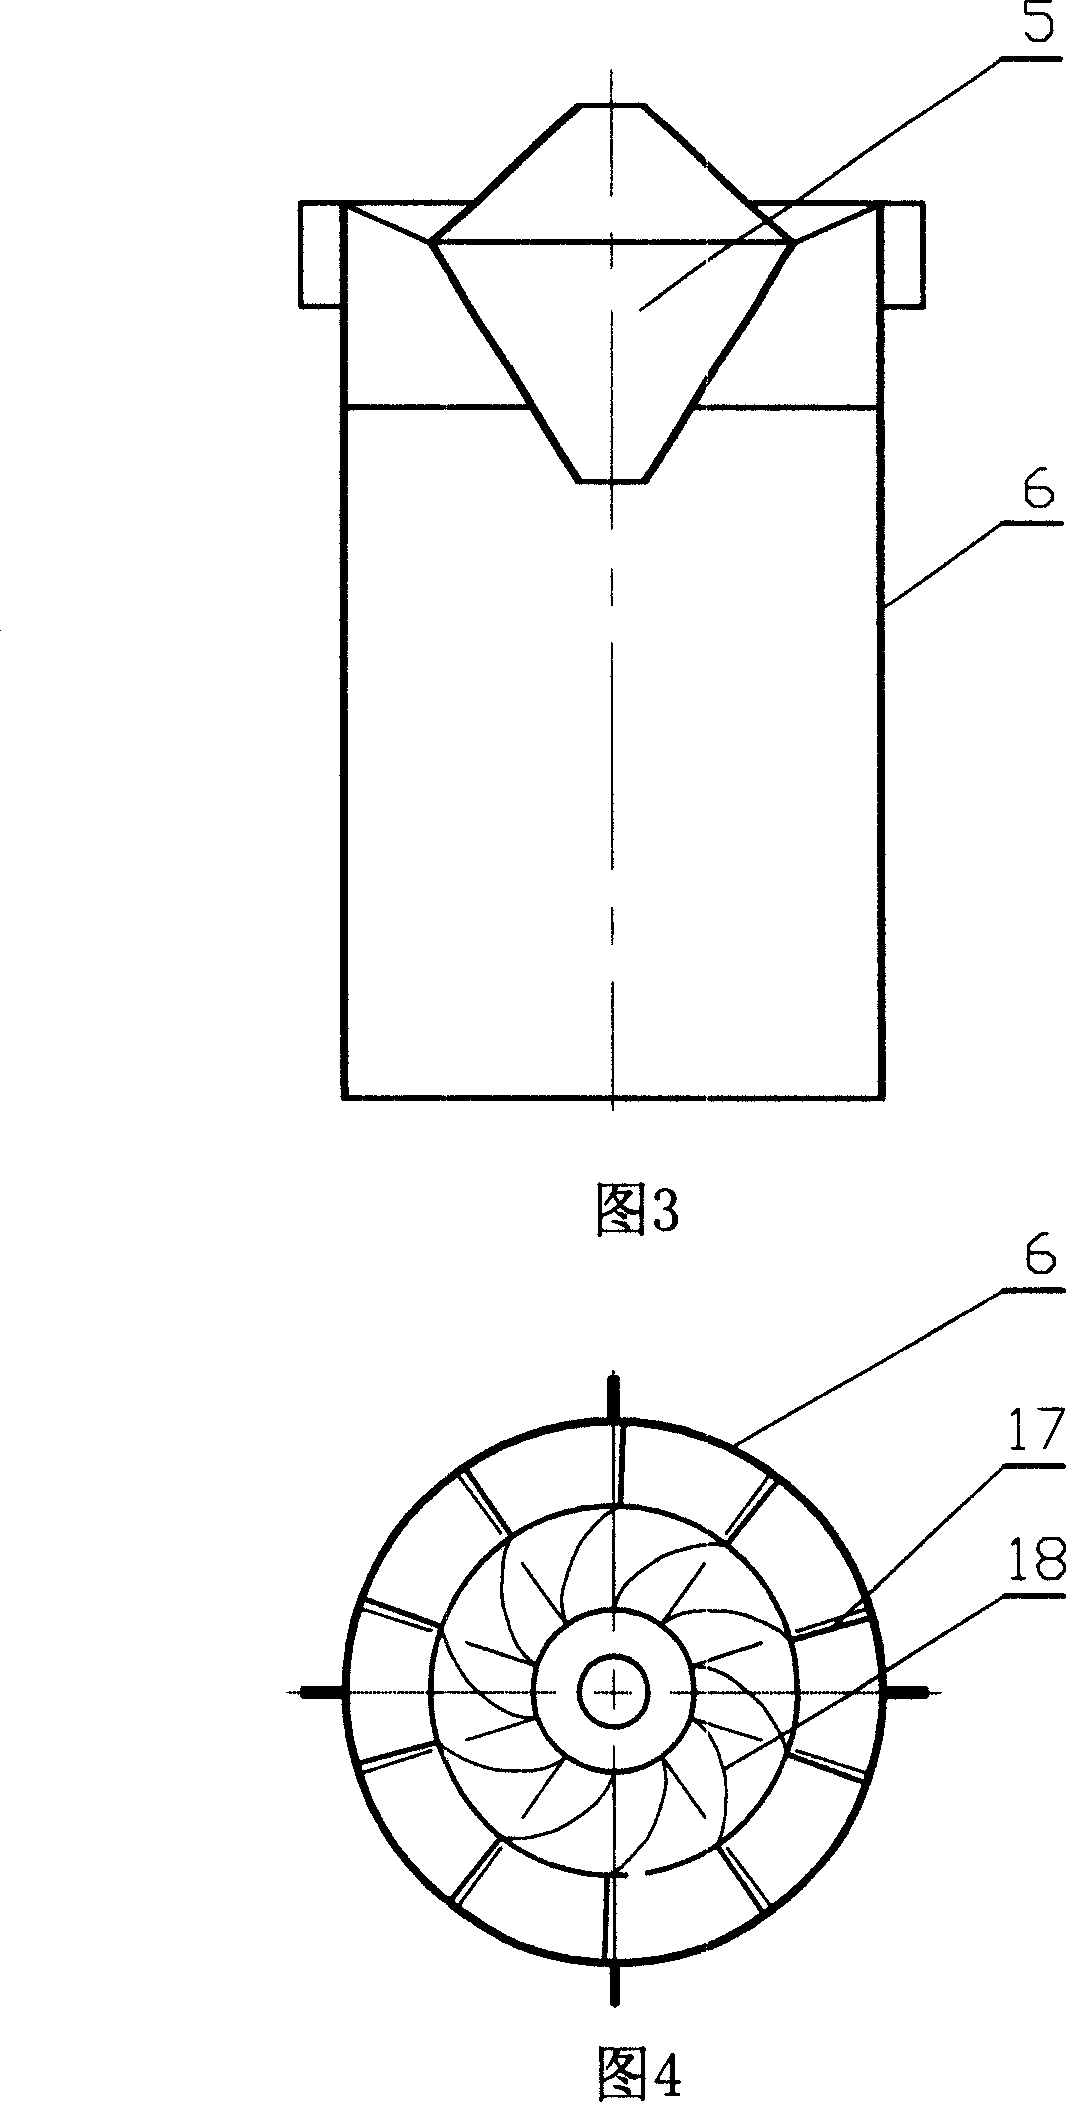 Integration dust-removing and desulfurizing device